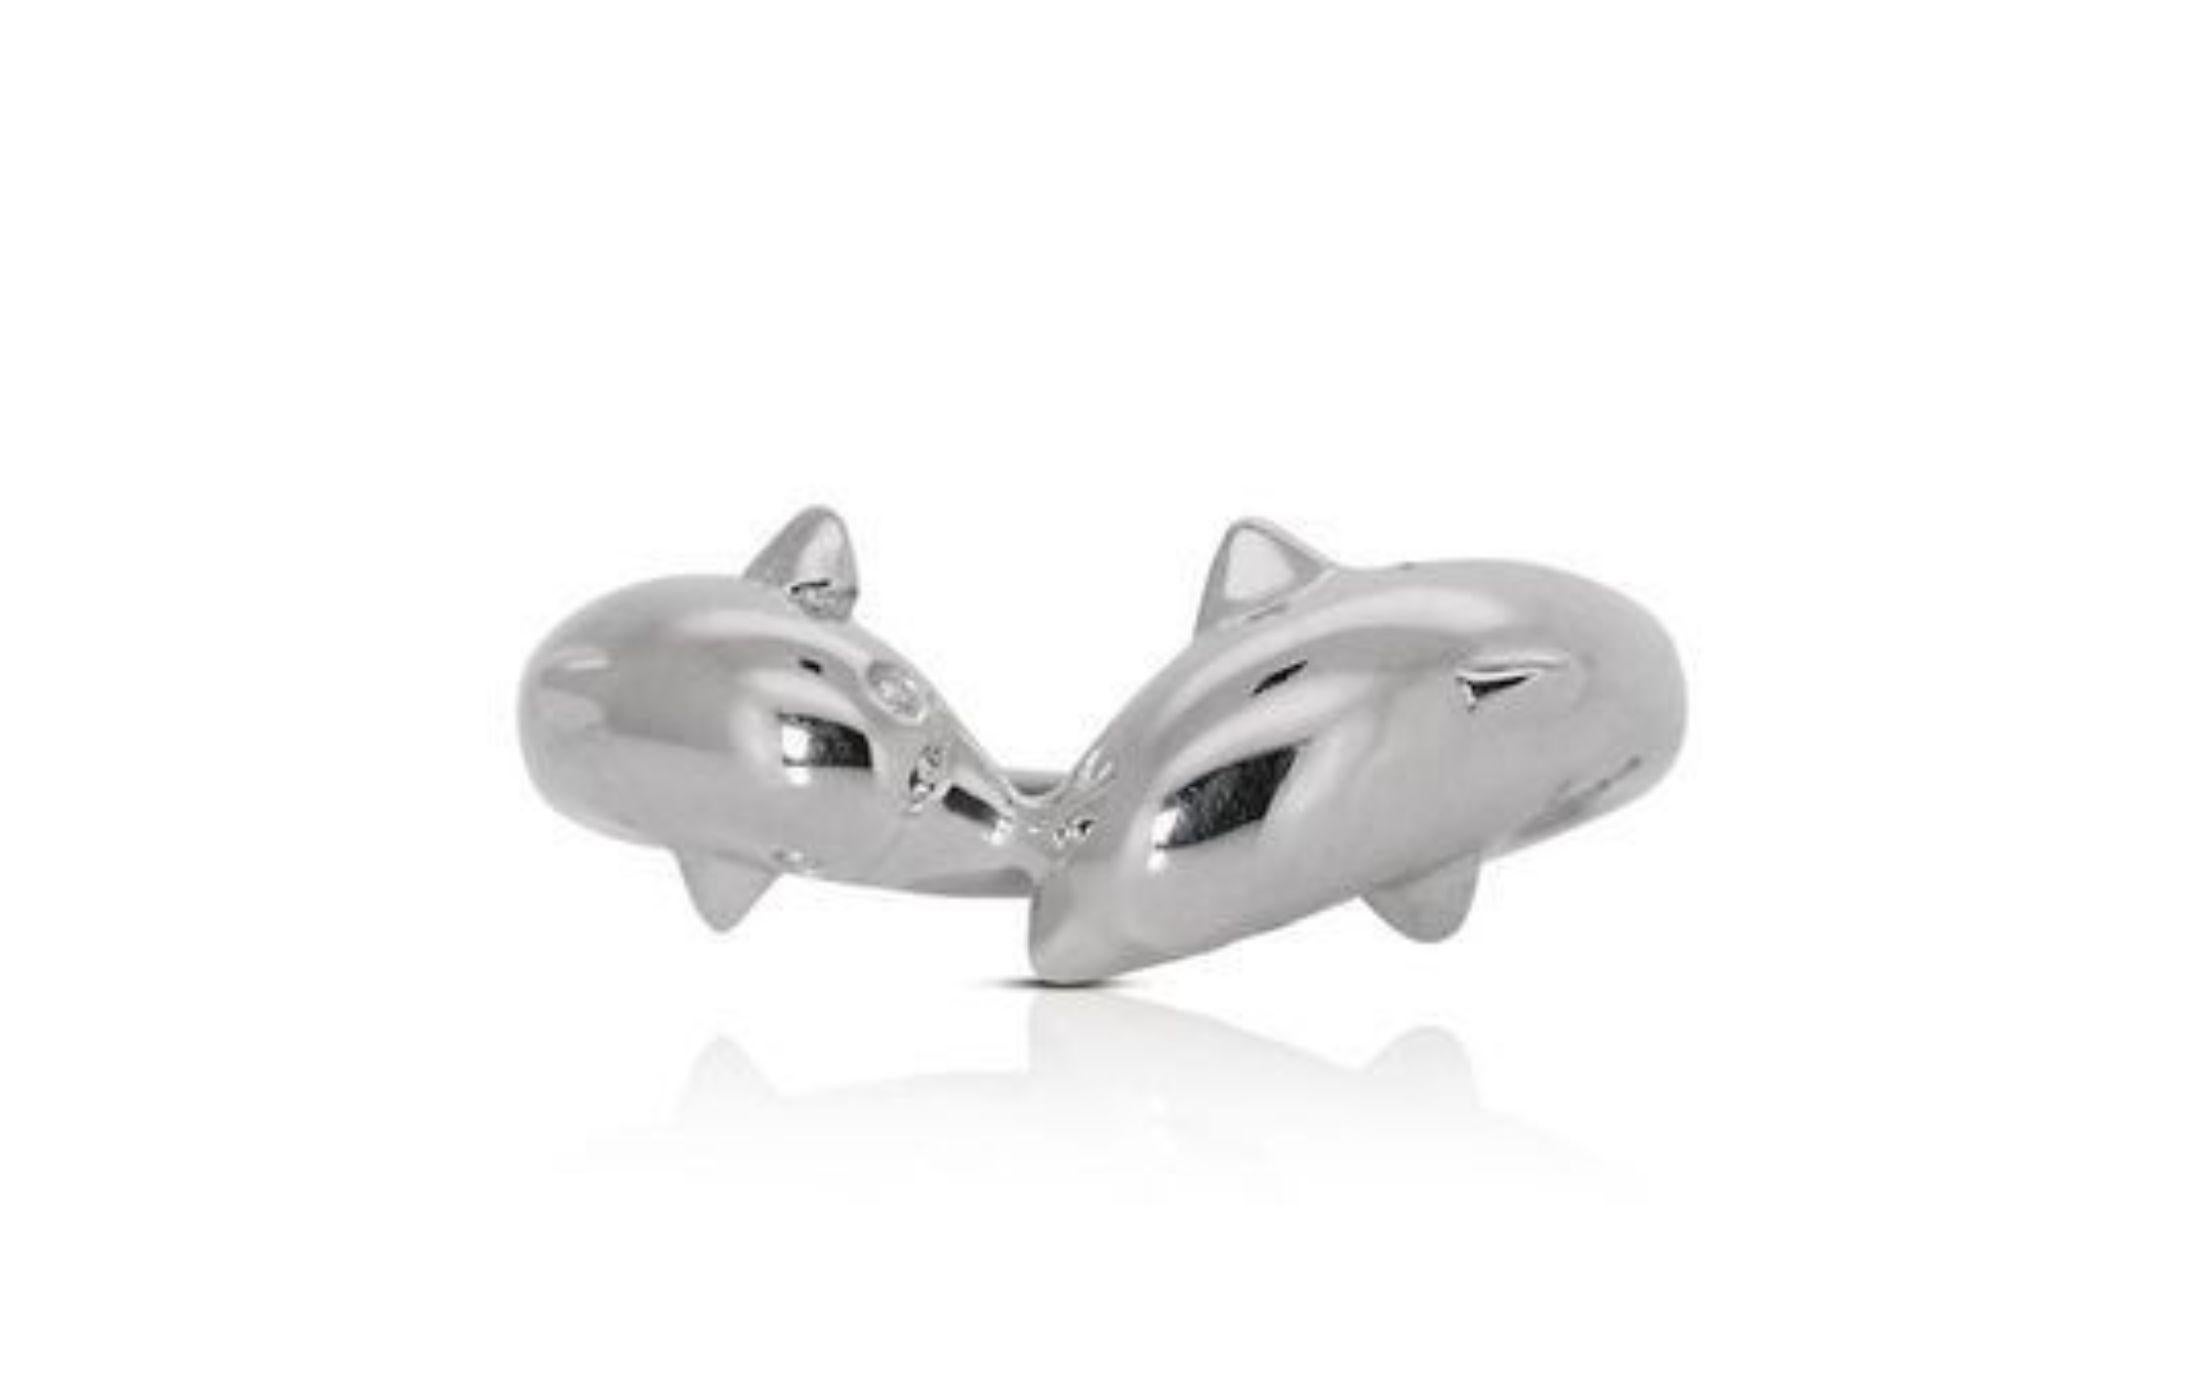 The focal point of the ring features a pair of intricately designed dolphins, crafted from lustrous 18K white gold. These dolphins seem to leap gracefully out of the ring, their sleek forms and fine details, such as their curved bodies and tails,